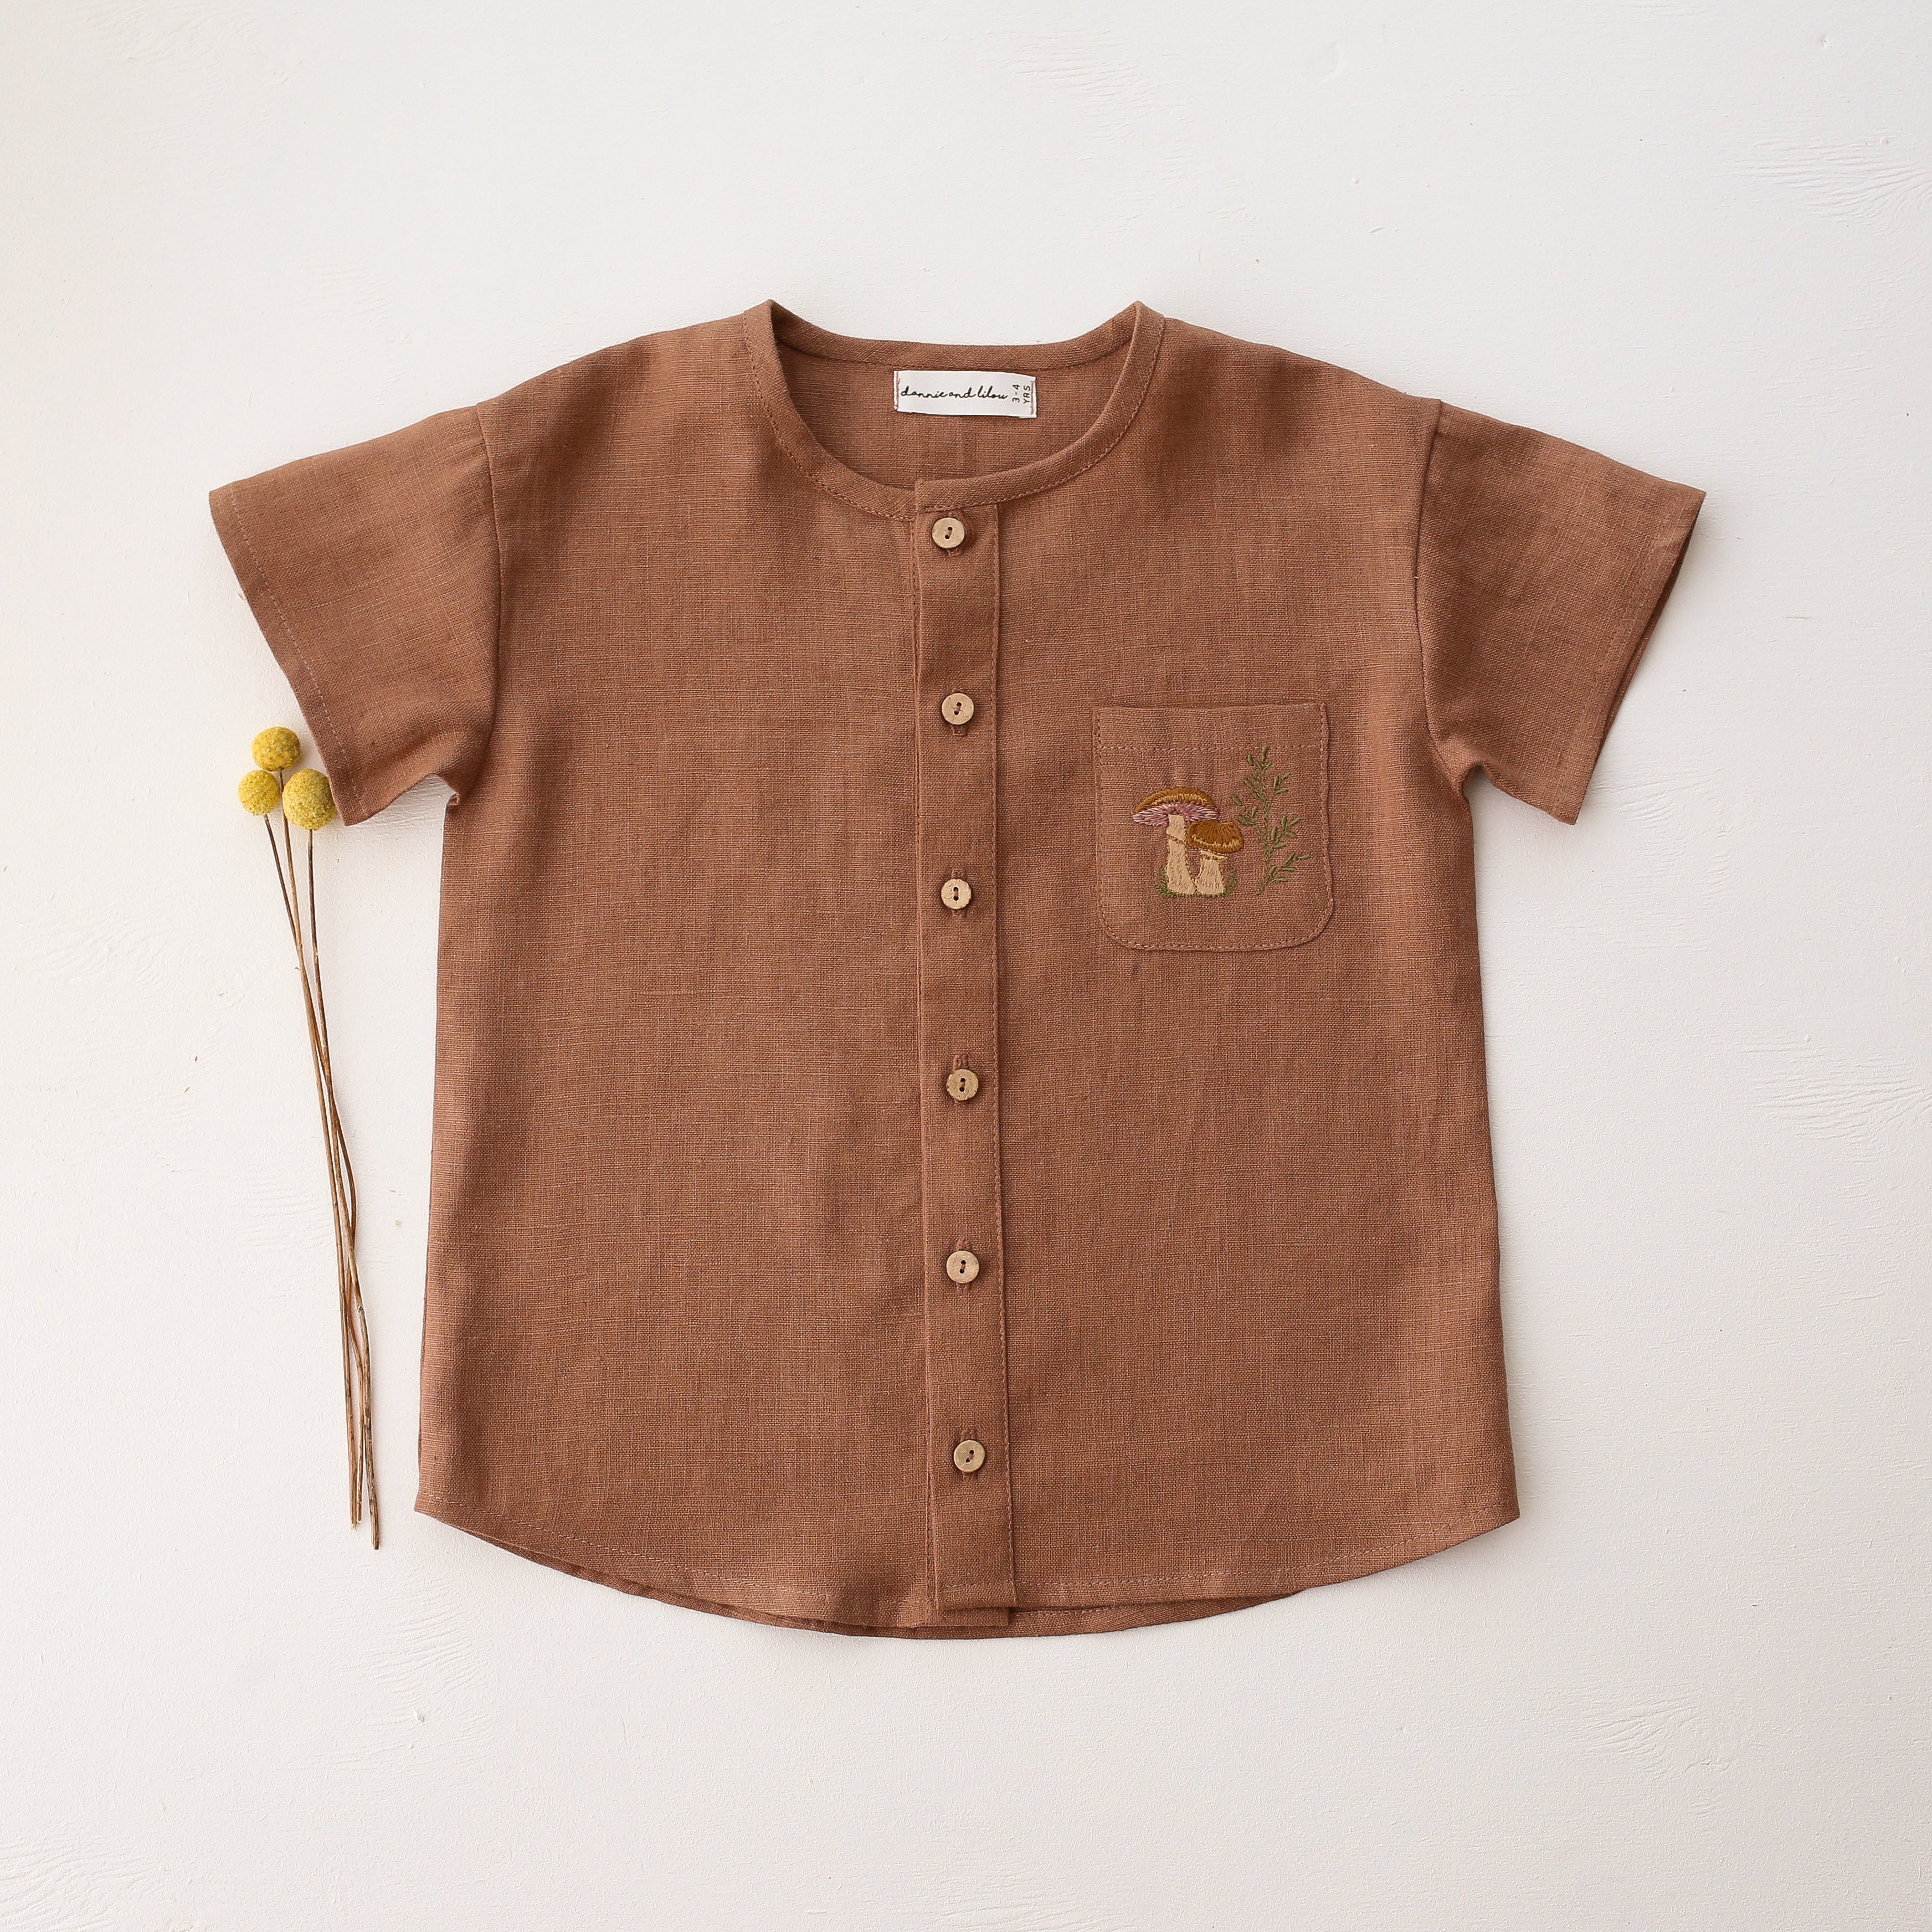 Cocoa Brown Linen Short Sleeve Buttoned Shirt with Pocket with "Mushrooms" Embroidery